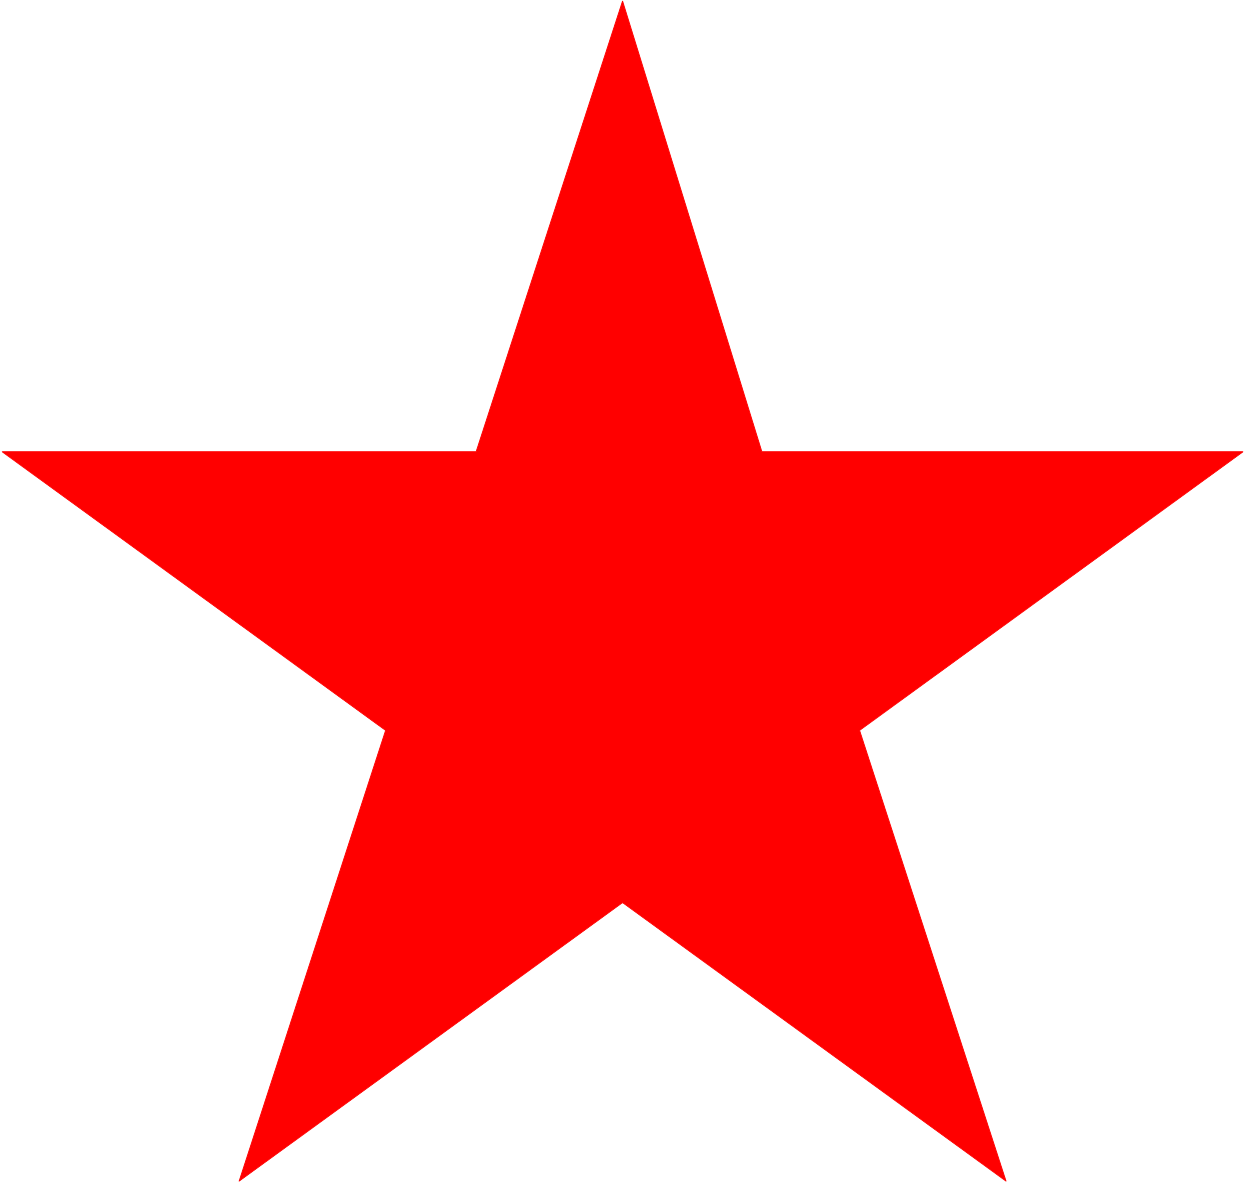 File:Star insigna.png - Wikimedia Commons